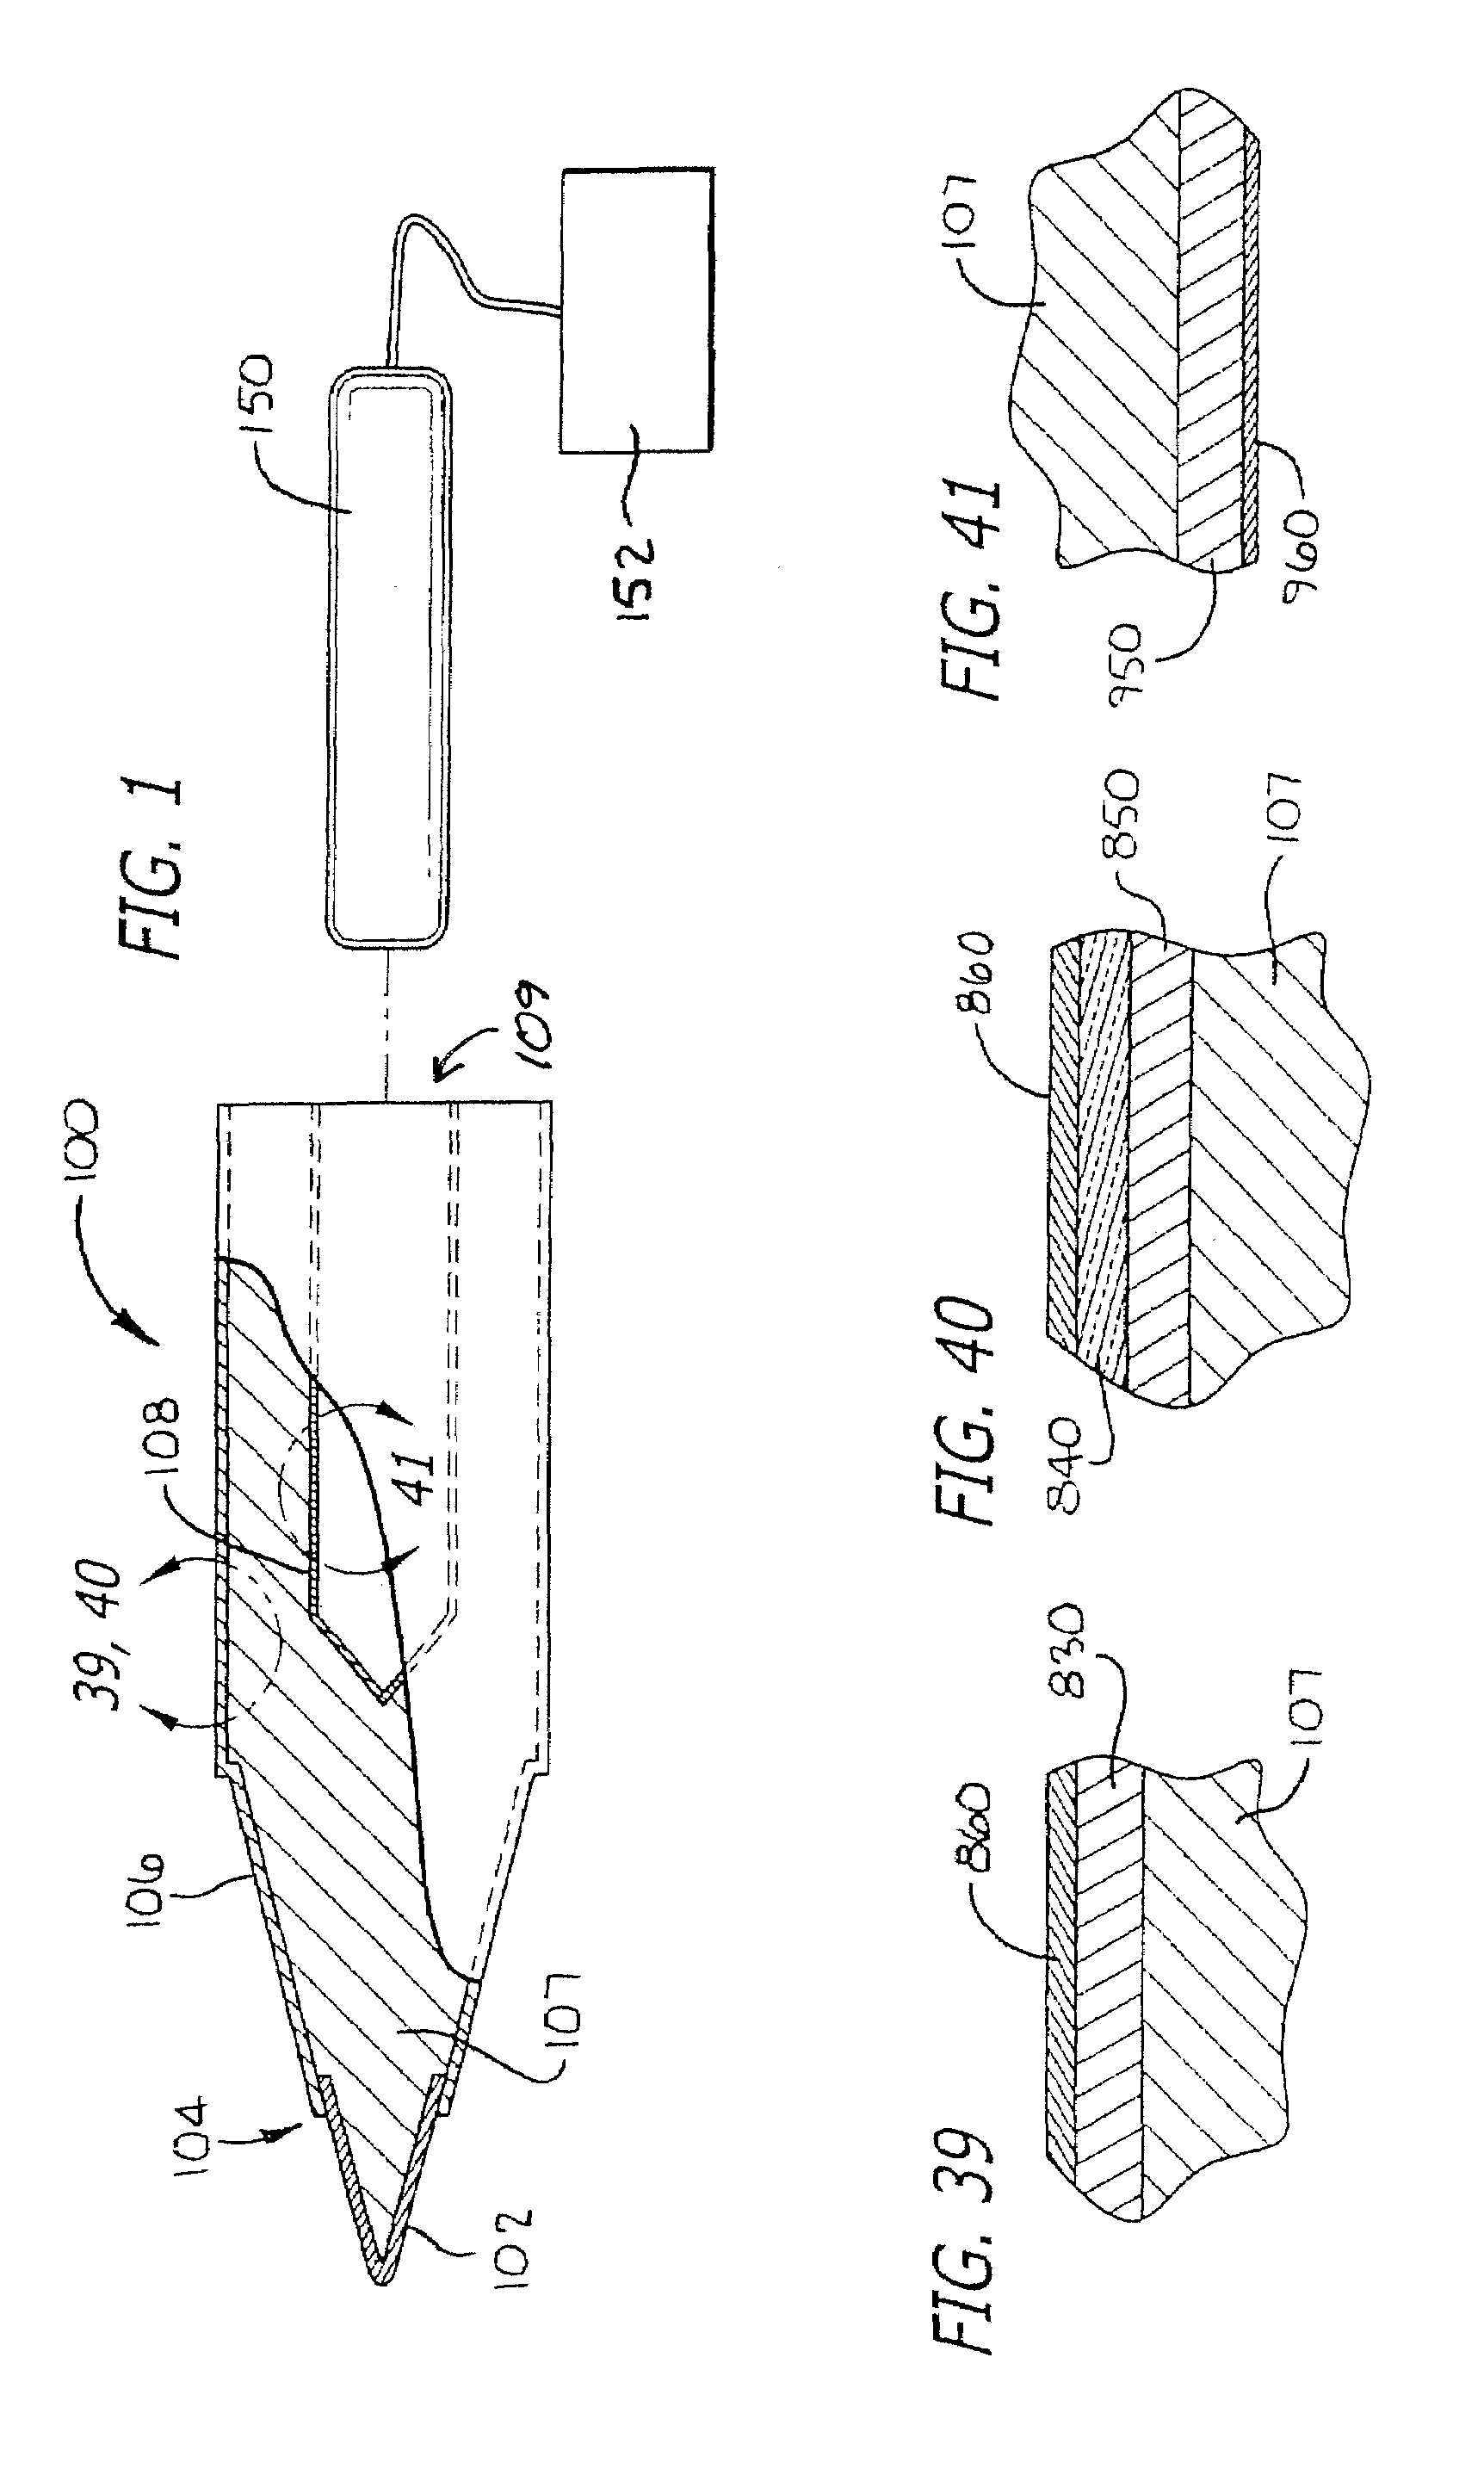 Method of soldering iron tip with metal particle sintered member connected to heat conducting core